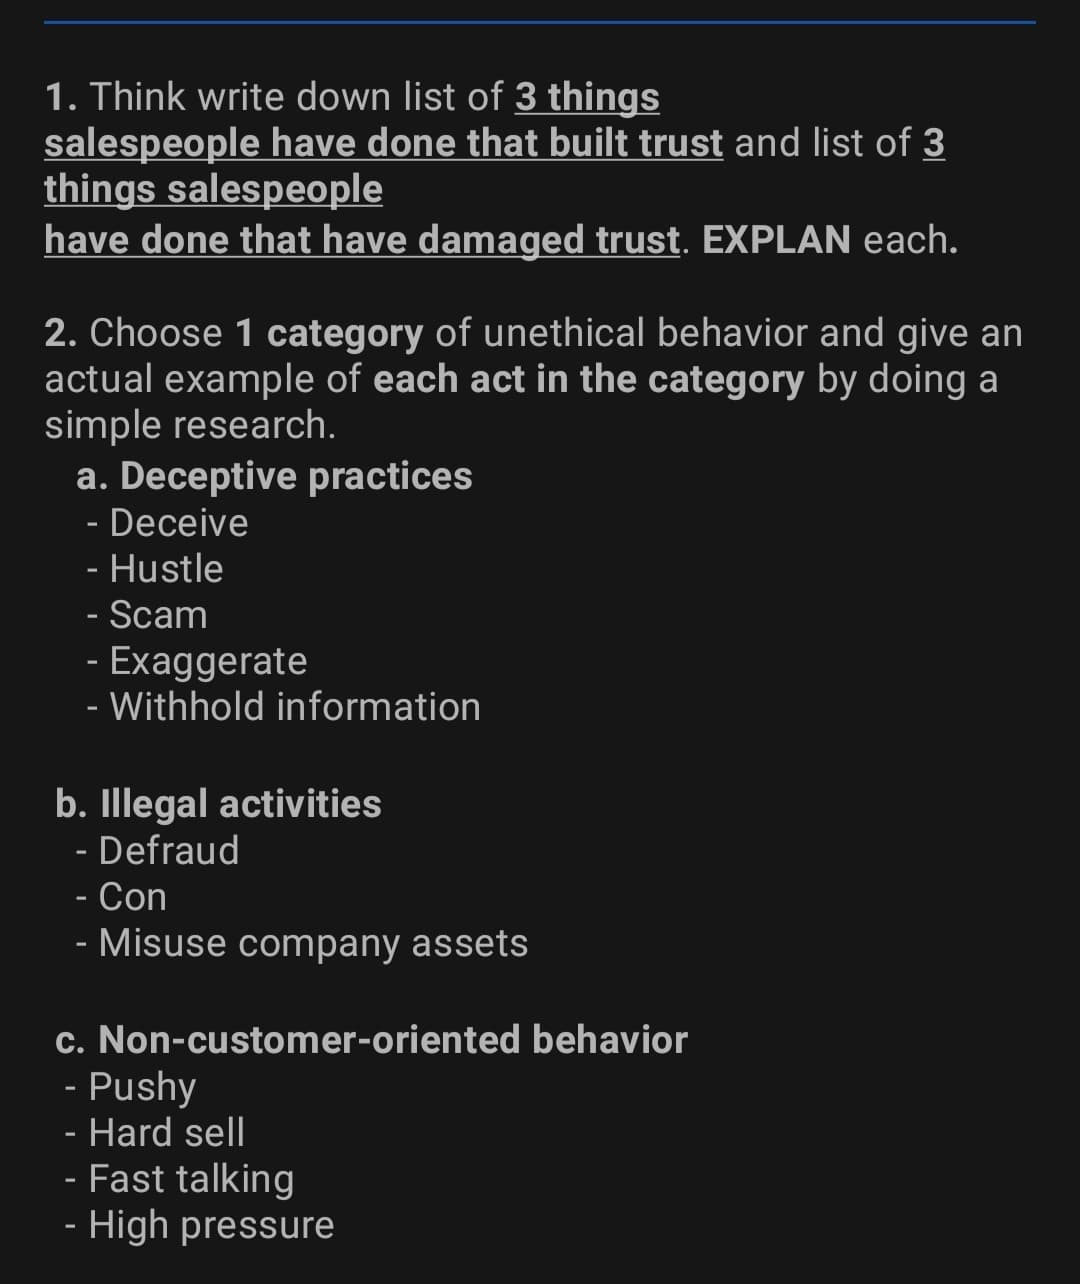 1. Think write down list of 3 things
salespeople have done that built trust and list of 3
things salespeople
have done that have damaged trust. EXPLAN each.
2. Choose 1 category of unethical behavior and give an
actual example of each act in the category by doing a
simple research.
a. Deceptive practices
- Deceive
- Hustle
- Scam
Exaggerate
- Withhold information
b. Illegal activities
- Defraud
- Con
- Misuse company assets
c. Non-customer-oriented behavior
- Pushy
- Hard sell
- Fast talking
- High pressure
